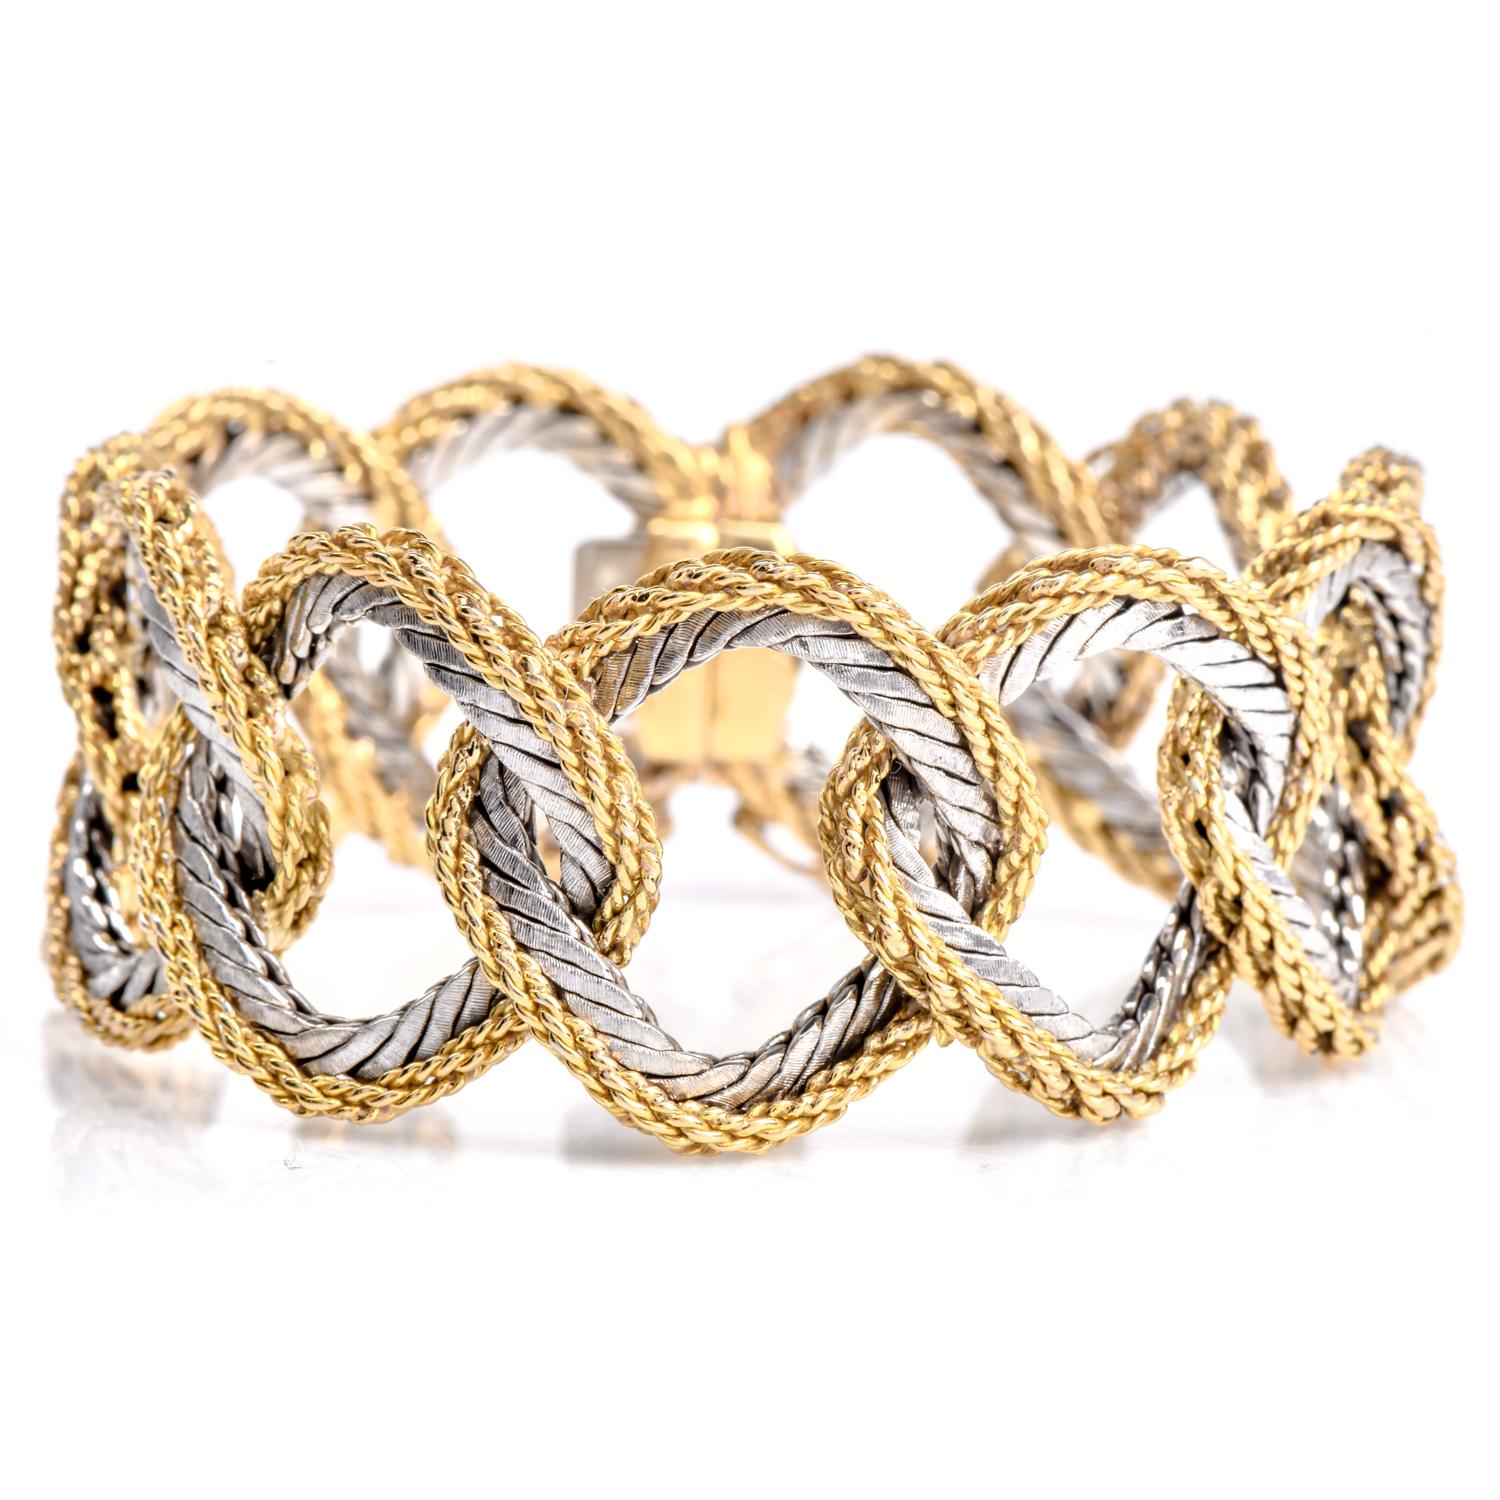 Presenting this vintage Buccellati bracelet crafted from the finest 18K yellow and white gold. This bracelet showcases the mastery of Bucchellati artisanship, featuring captivating borders intricately woven in yellow gold with flattened cushion